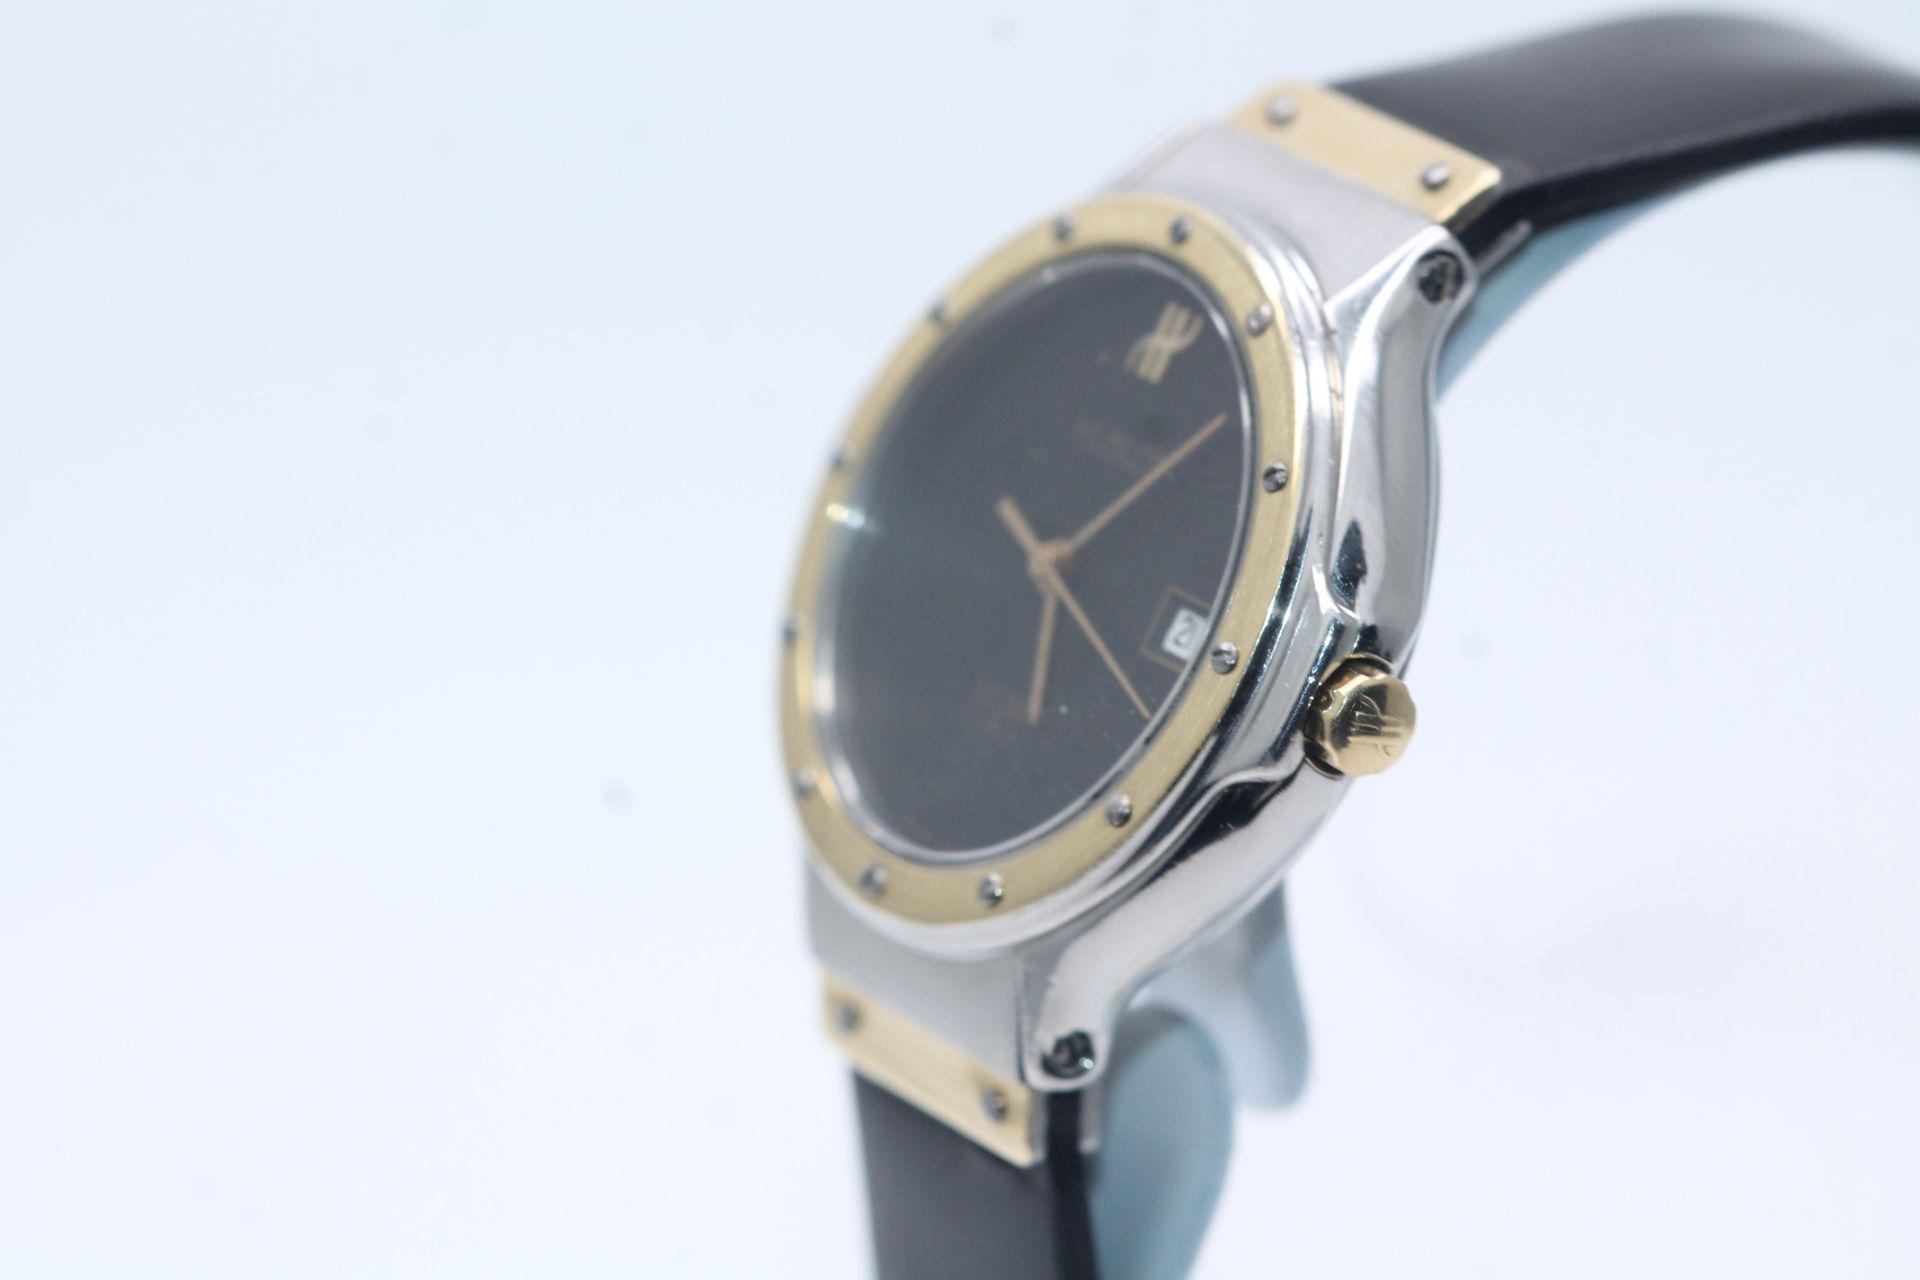 Ladies Hublot MDM Geneve Watch, Black Rubber Strap, Stainless Steel Case And 18ct Yellow Gold, - Image 3 of 5